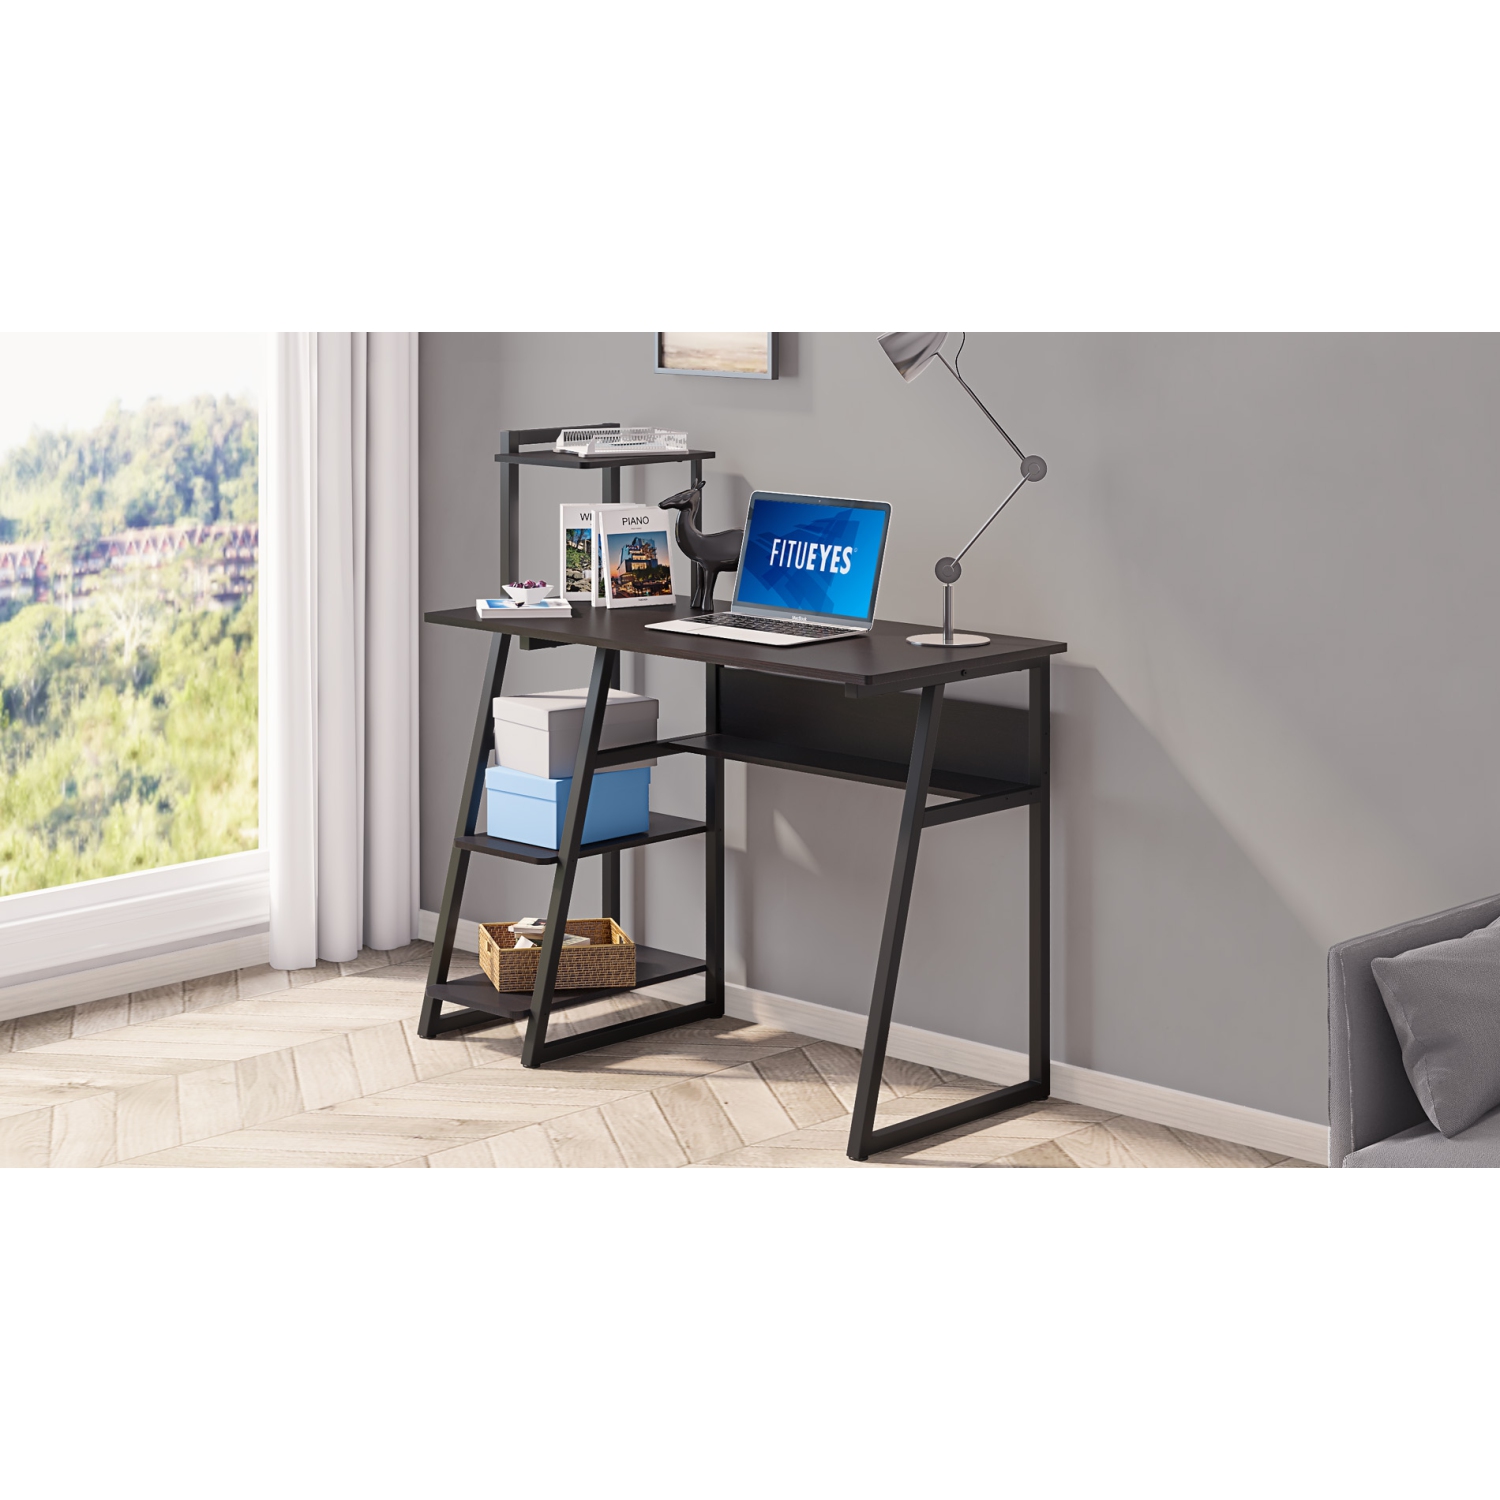 FITUEYES Computer Desk with Shelves,Home Office Writing Table with Bookshelf,40 Inch Modern Style PC Desk for Small Space,Black